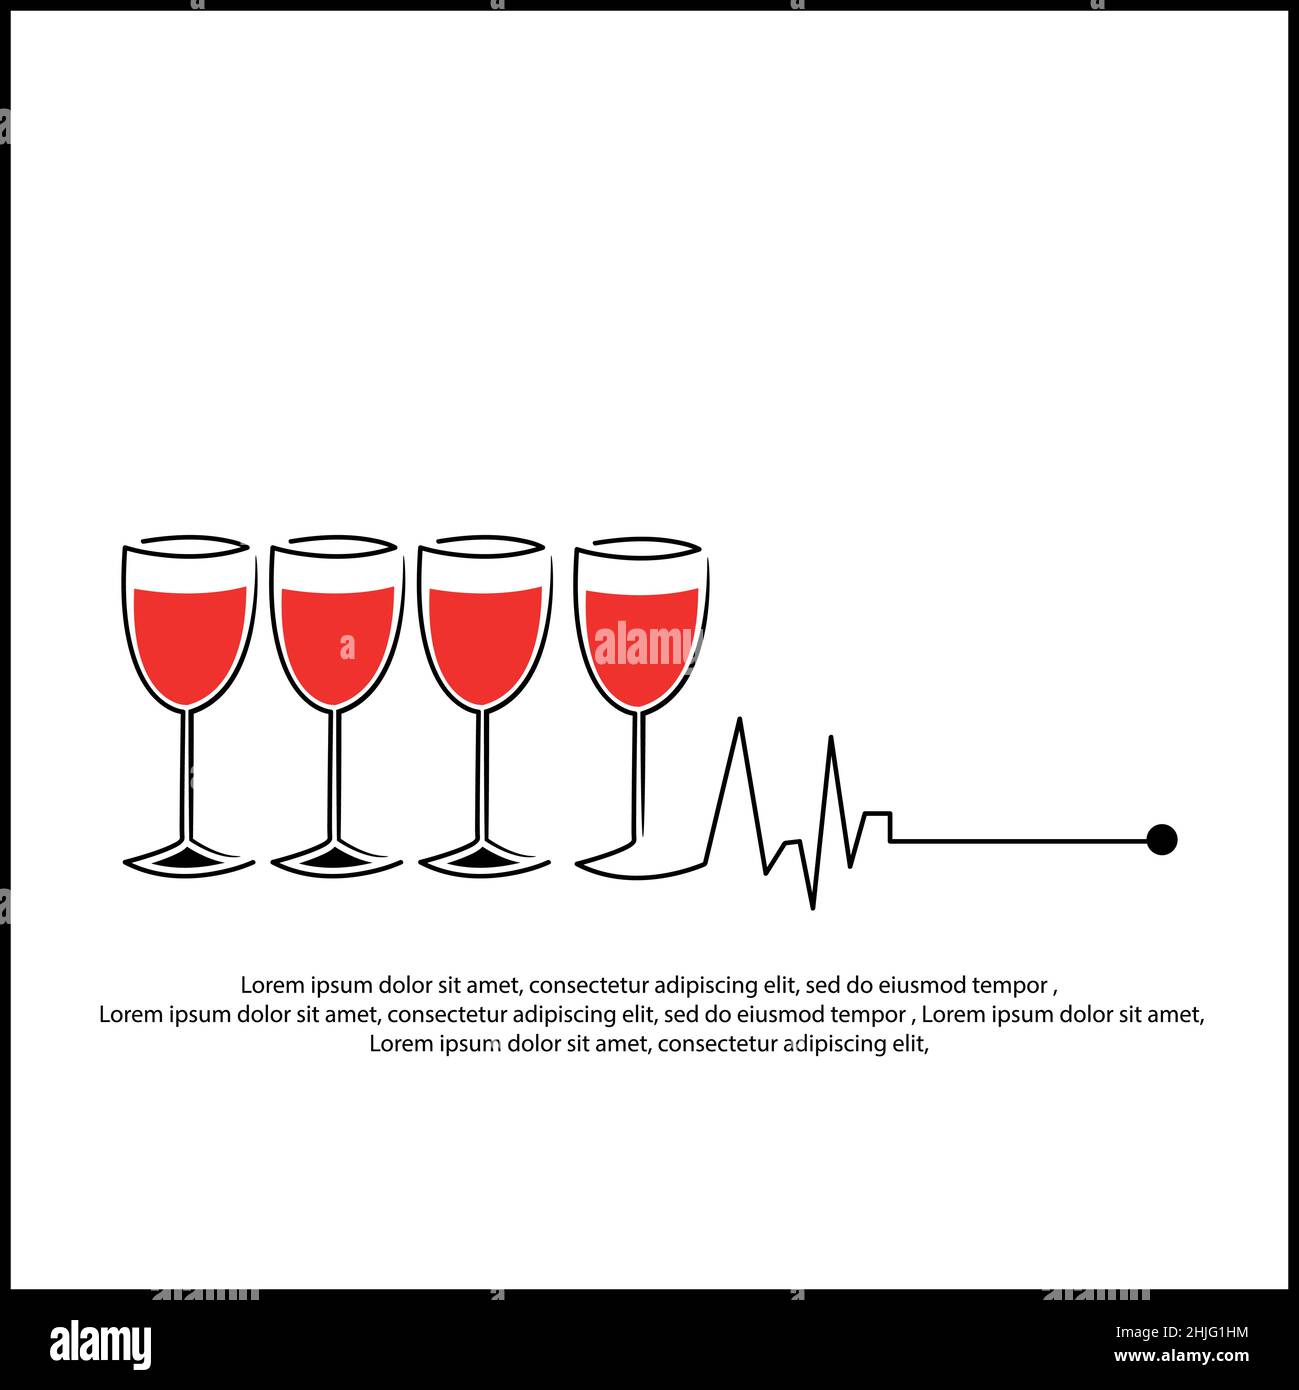 Conceptual illustration of heart rate and wine glass. Dangers of drinking alcohol. Stock Vector